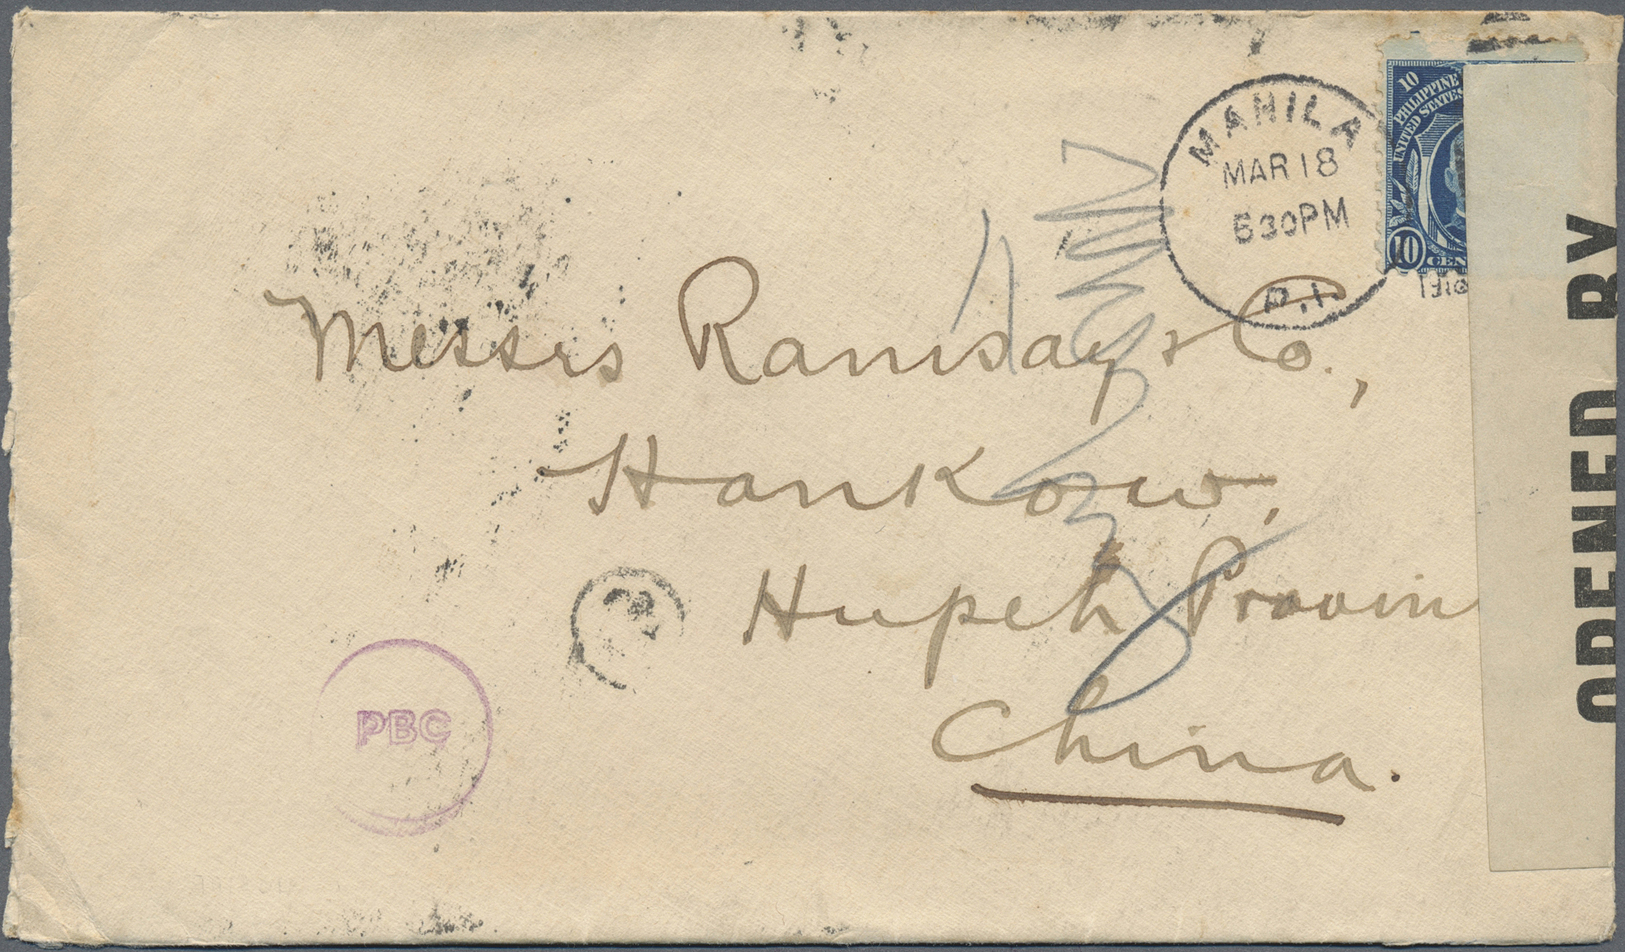 Br Philippinen: 1918. Censored Envelope Addressed To Hankow, Hupeh Province, China Bearing Philippines SG 287, 10c Blue - Filippine